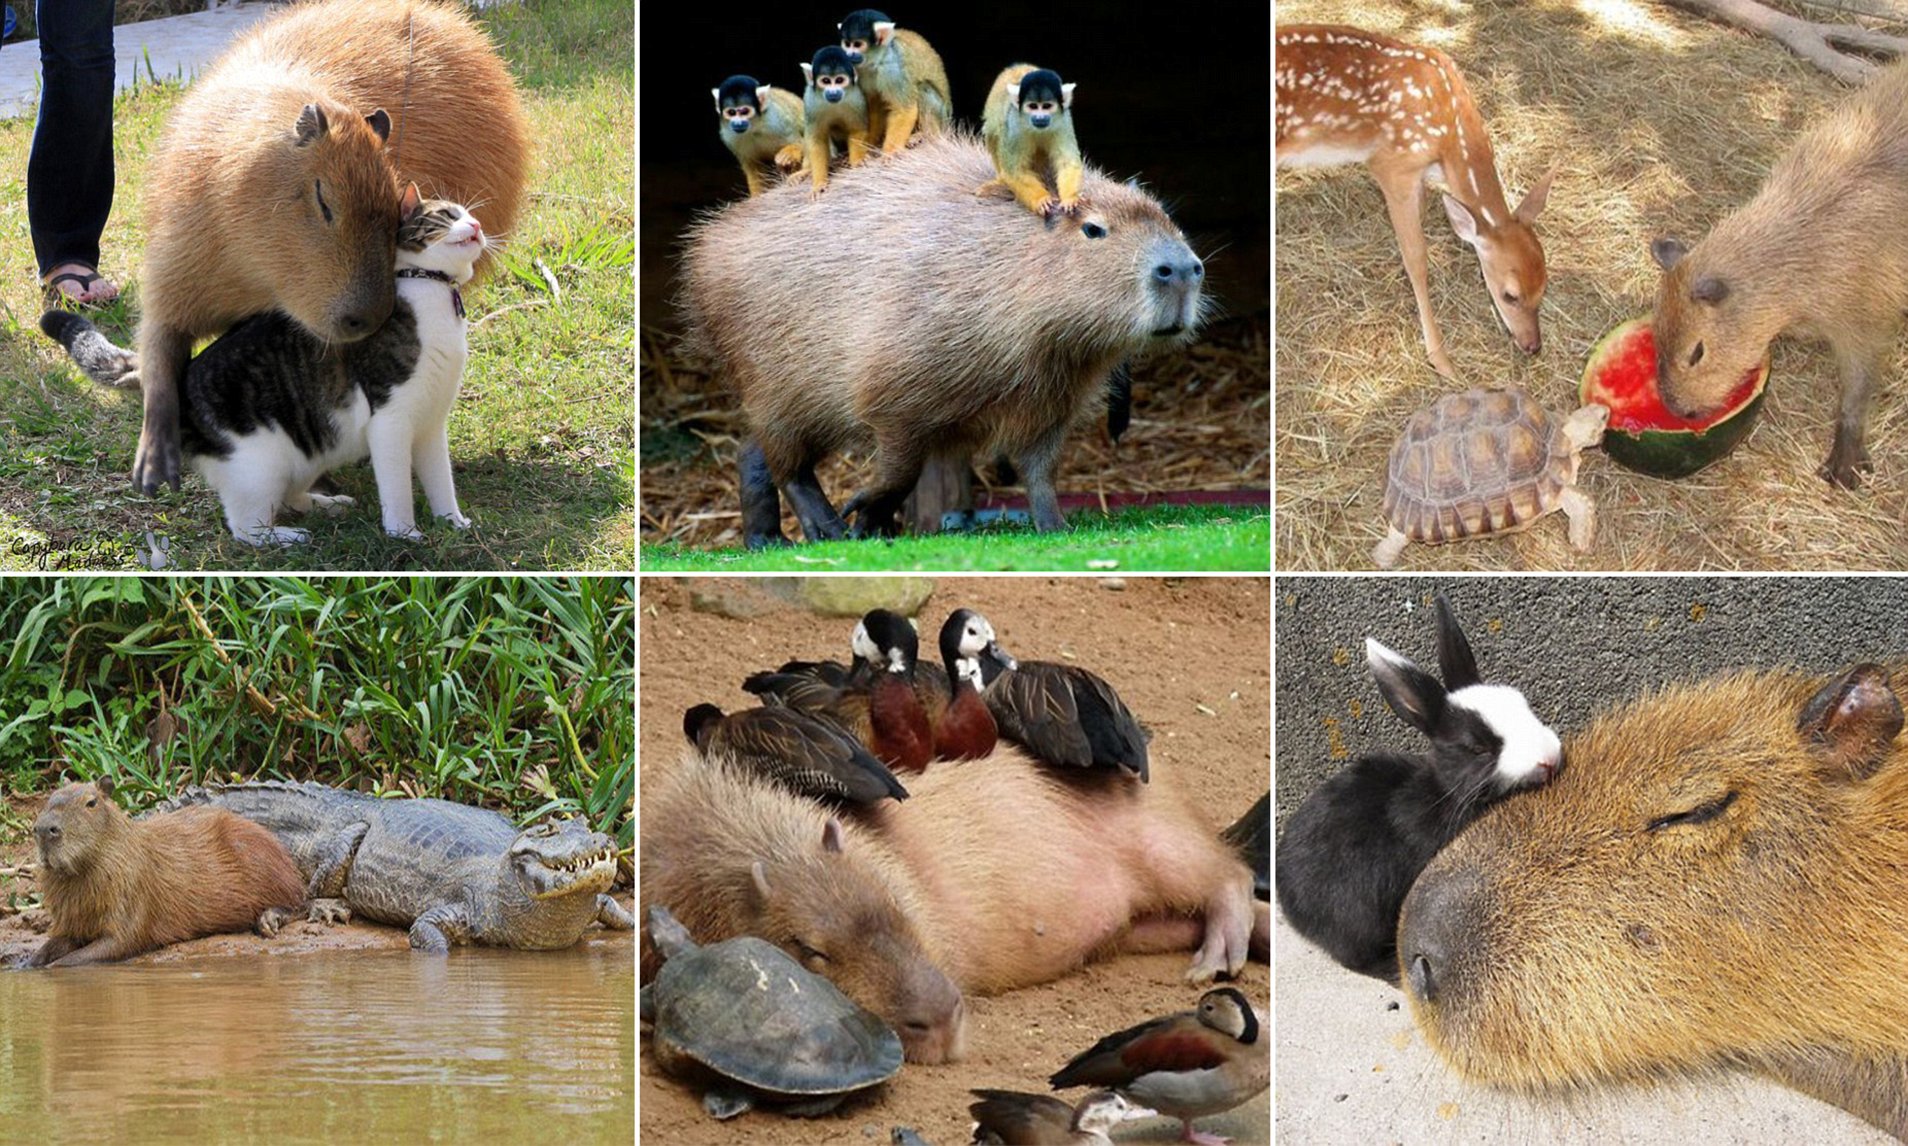 Capybaras being chill.